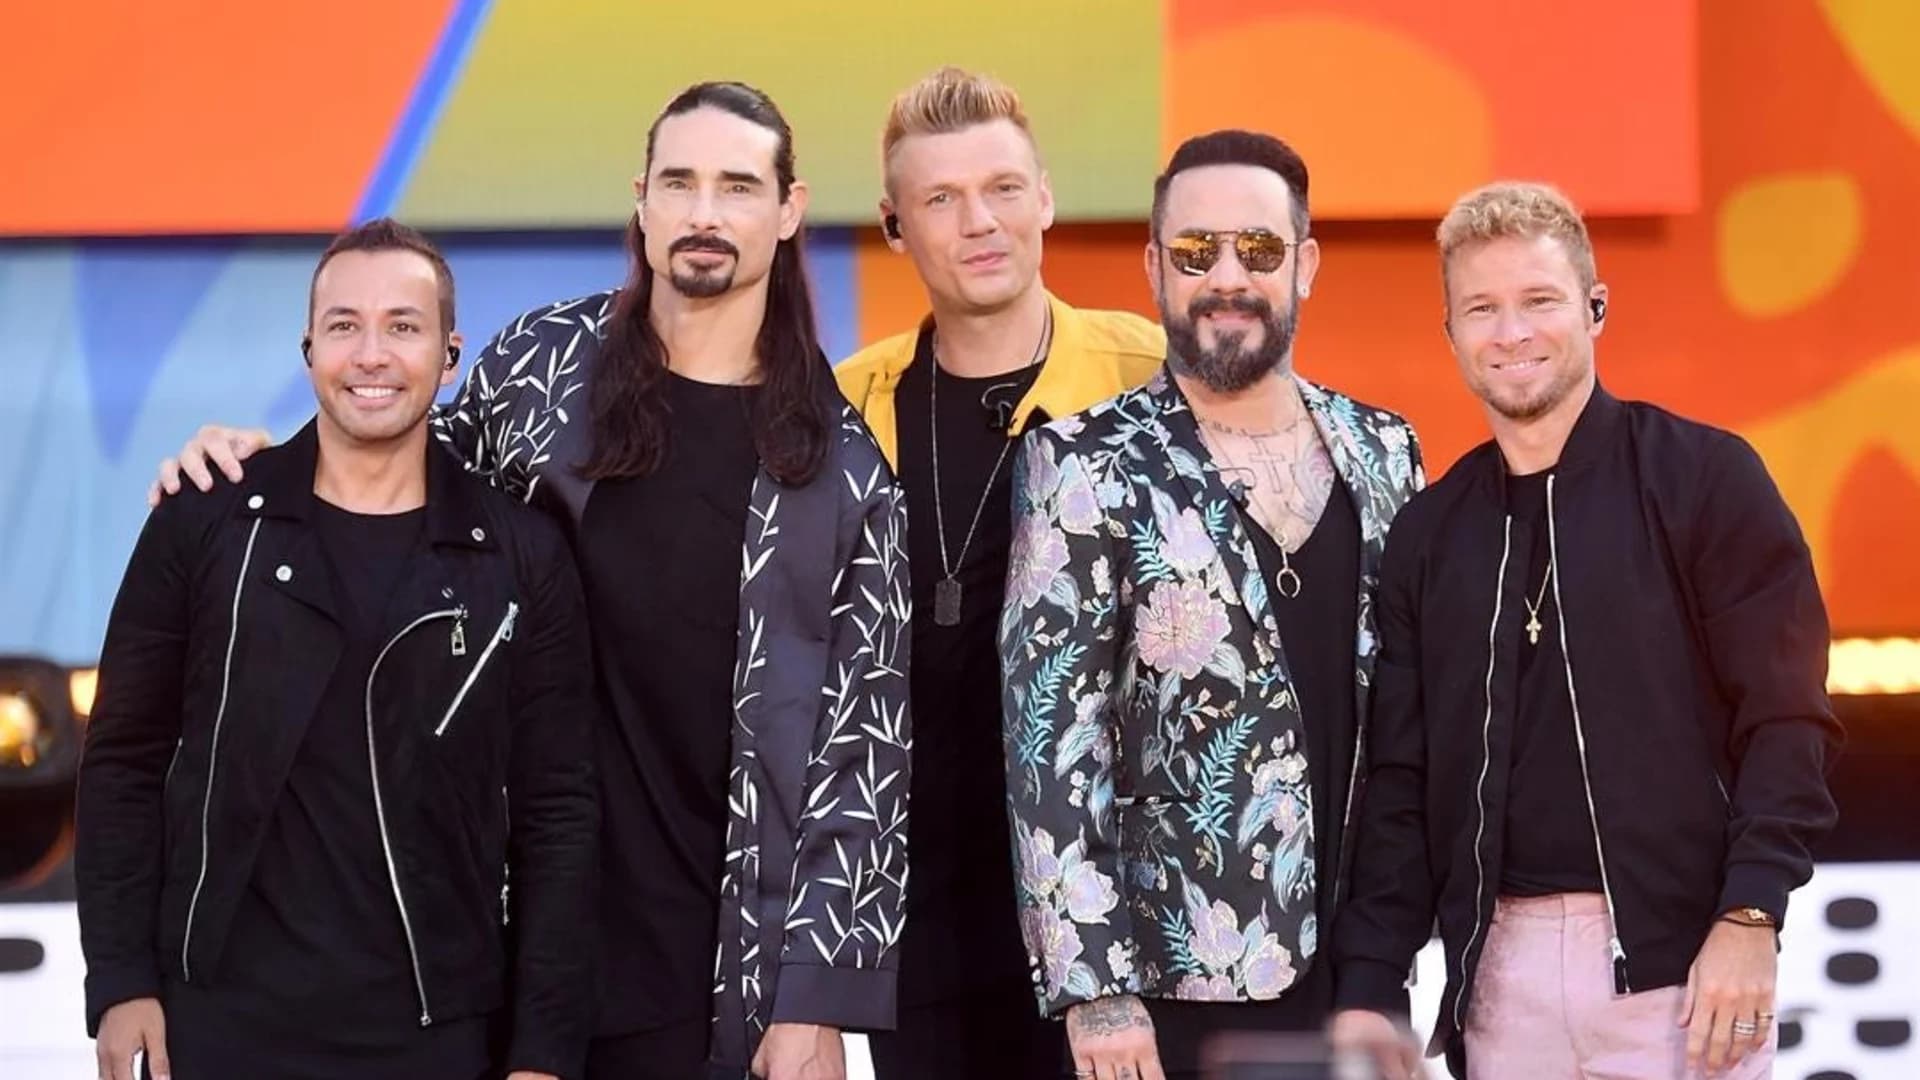 Backstreet’s Back with tour stops in NY, NJ this summer. Here is what you need to know